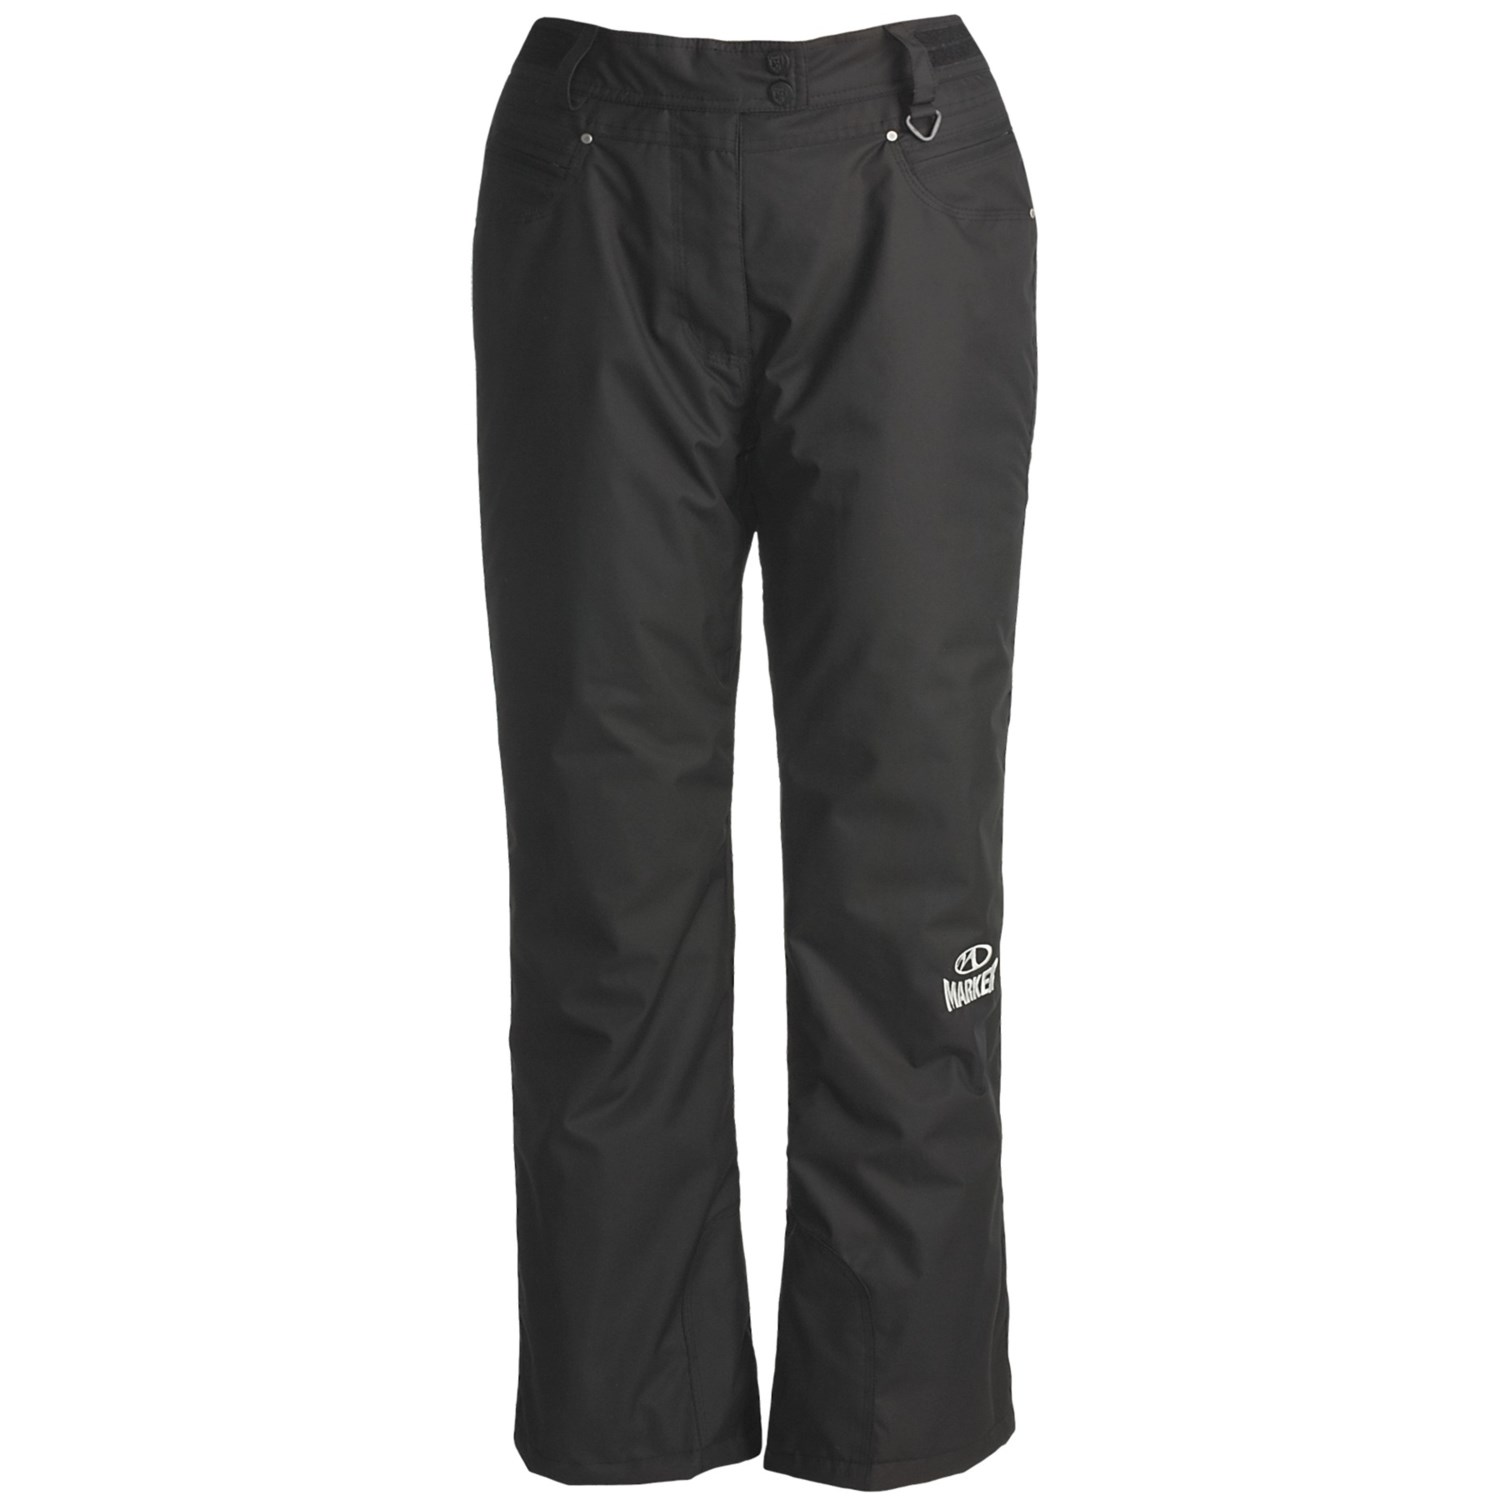 Marker High Performance Ski Pants   Waterproof, Insulated (For Women 